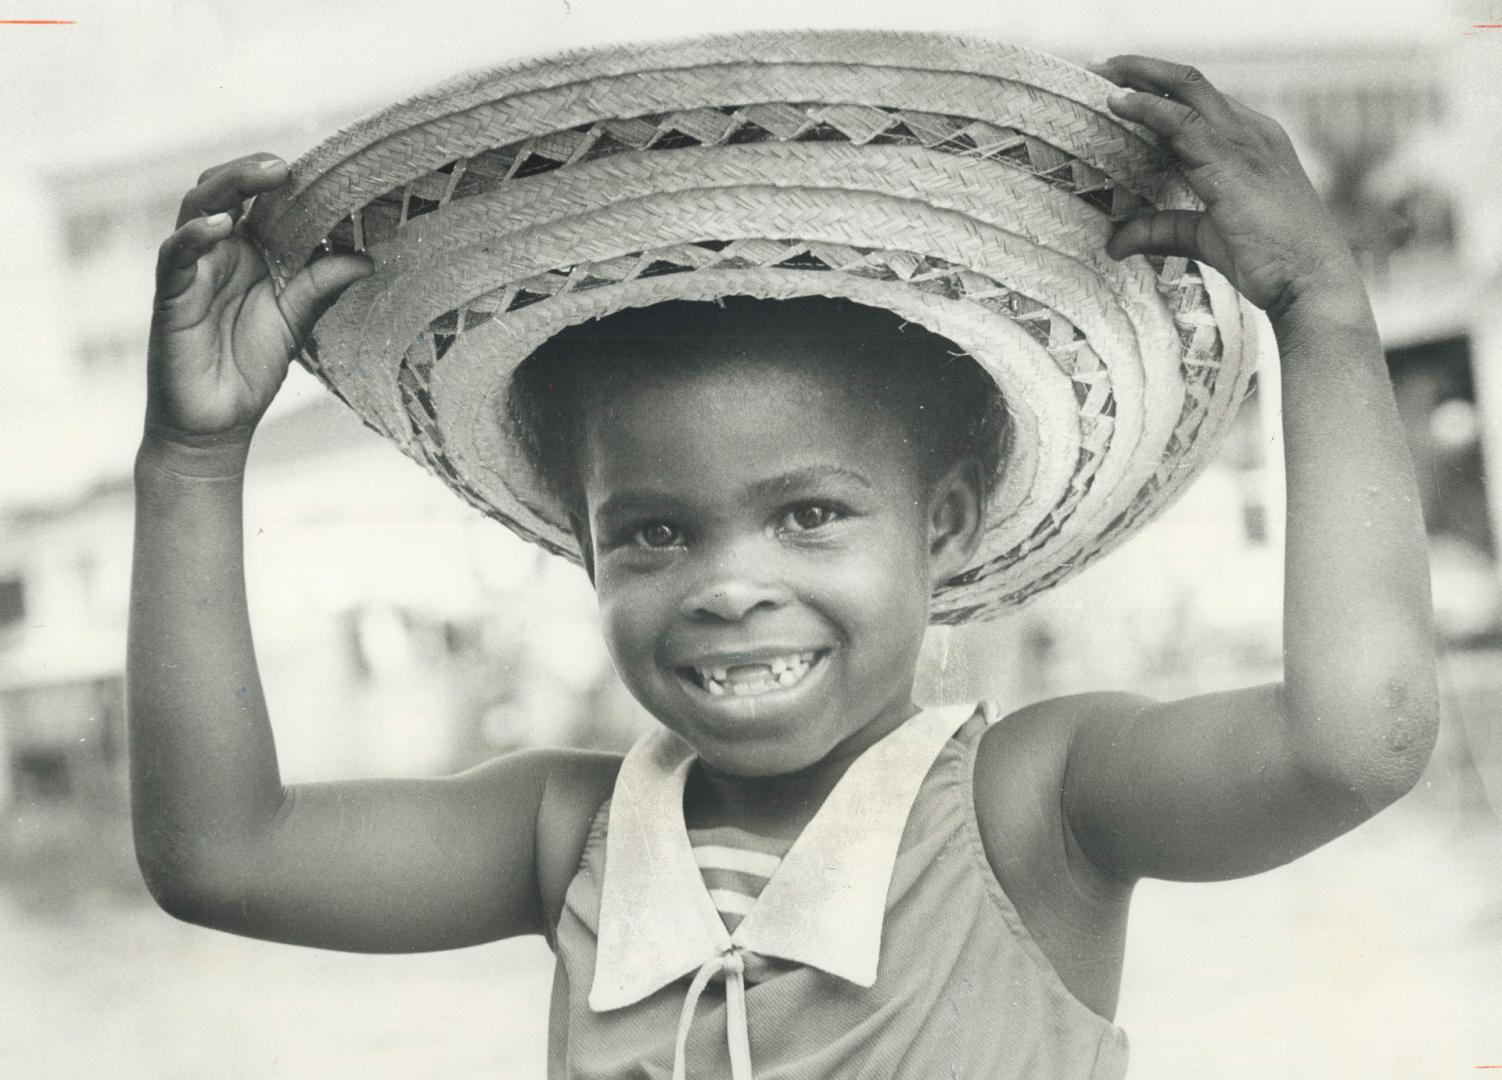 A wide if gap-toothed grin is bestowed by Bahamian child, above